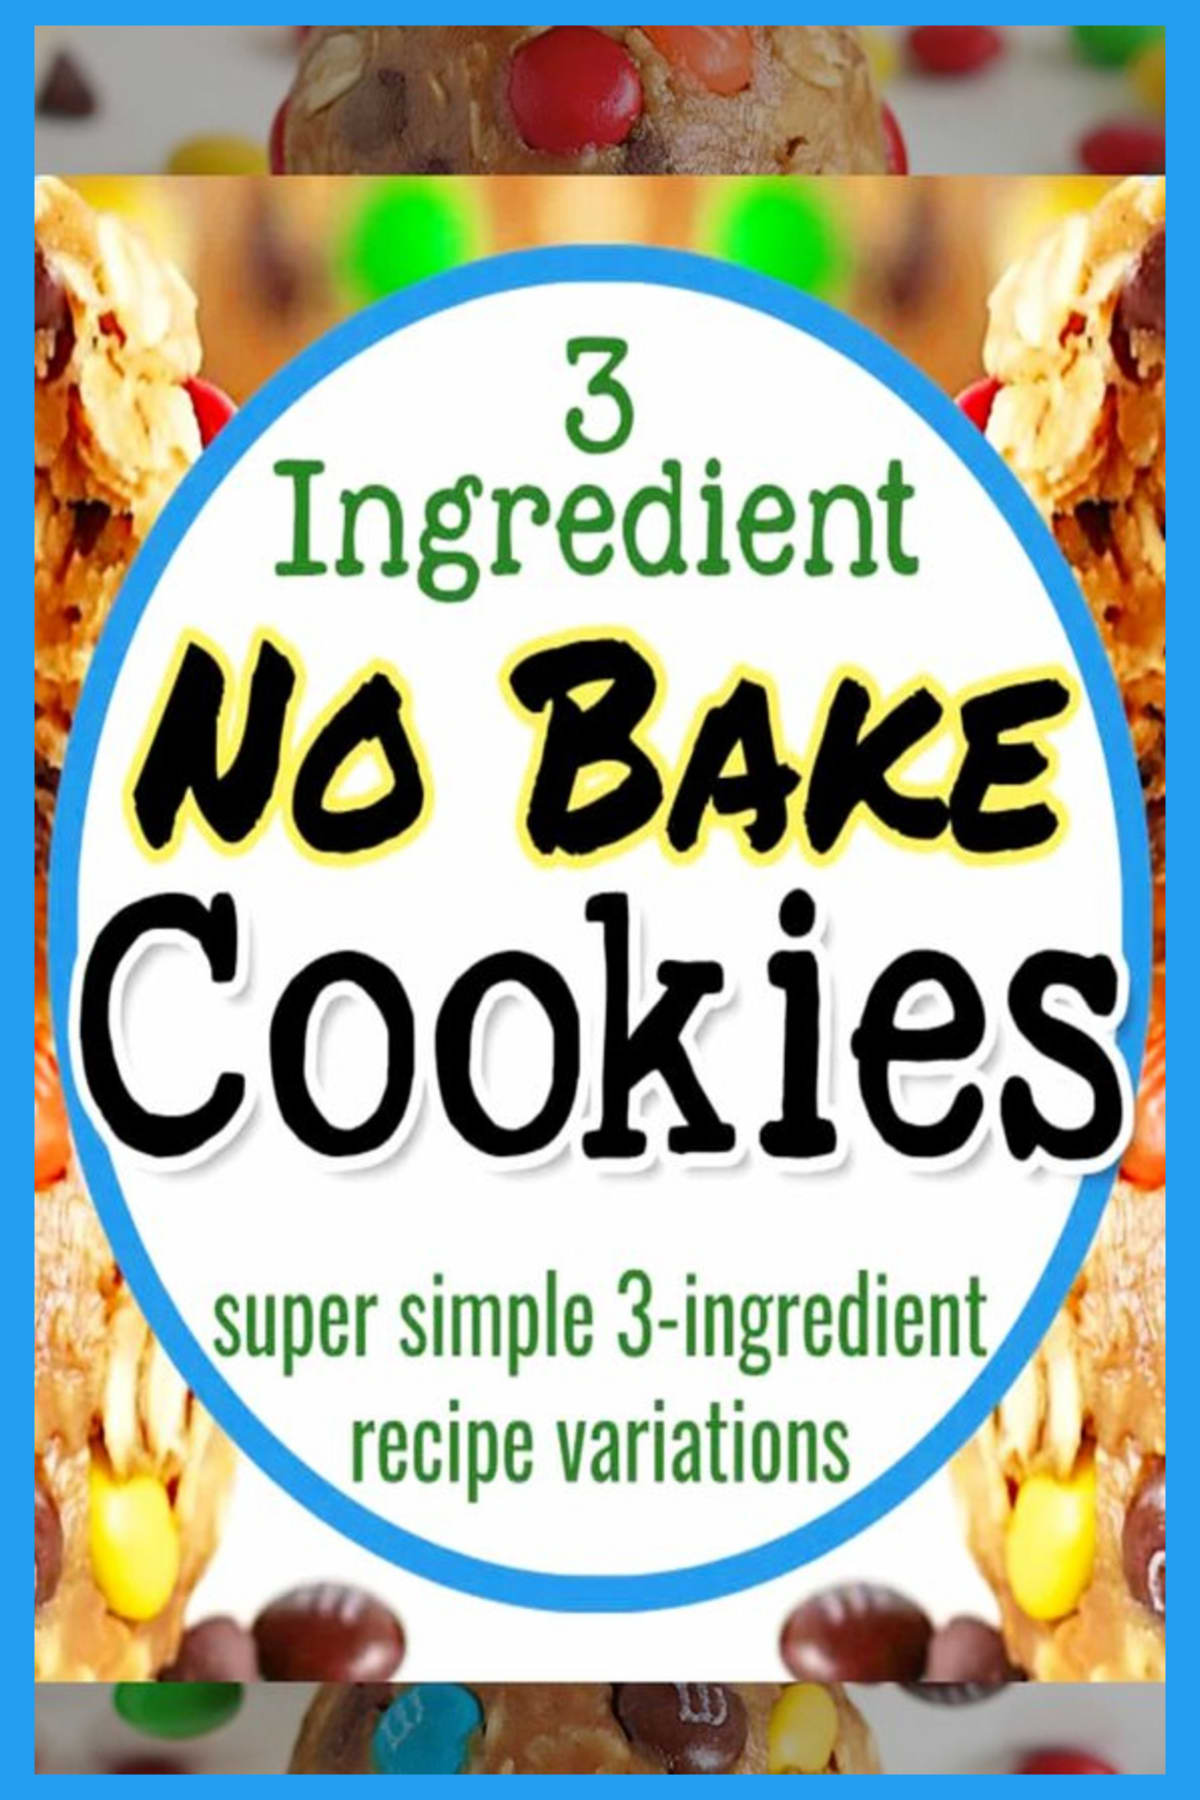 3-ingredient NO BAKE cookies - easy 3 ingredient no bake cookie recipe variations - without oatmeal, without peanut butter, healthy, sugar free and more